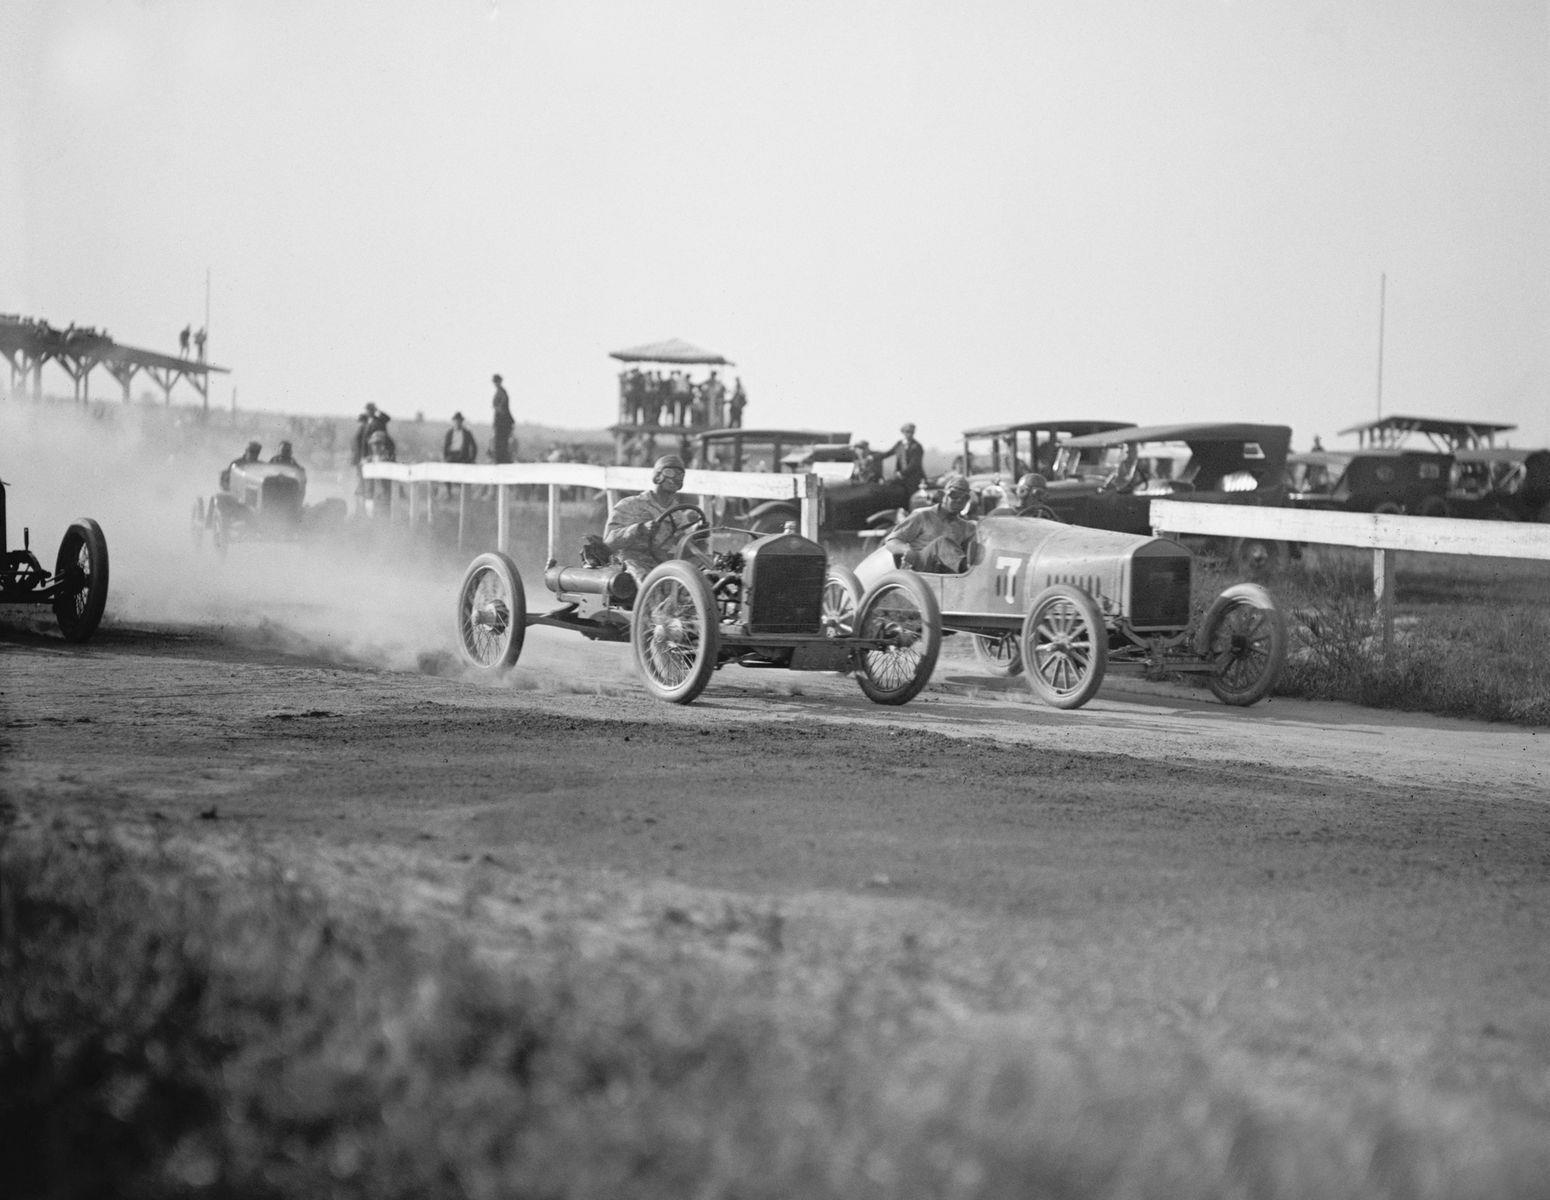 <p>The 1920s are now considered to be the <a href="https://journal.classiccars.com/2020/07/29/video-of-the-day-golden-age-motor-racing/">golden age of motor racing</a>. There was much excitement about the well-crafted cars and “crazy contraptions” as well as the thrill of racing on both road courses and racetracks.</p>